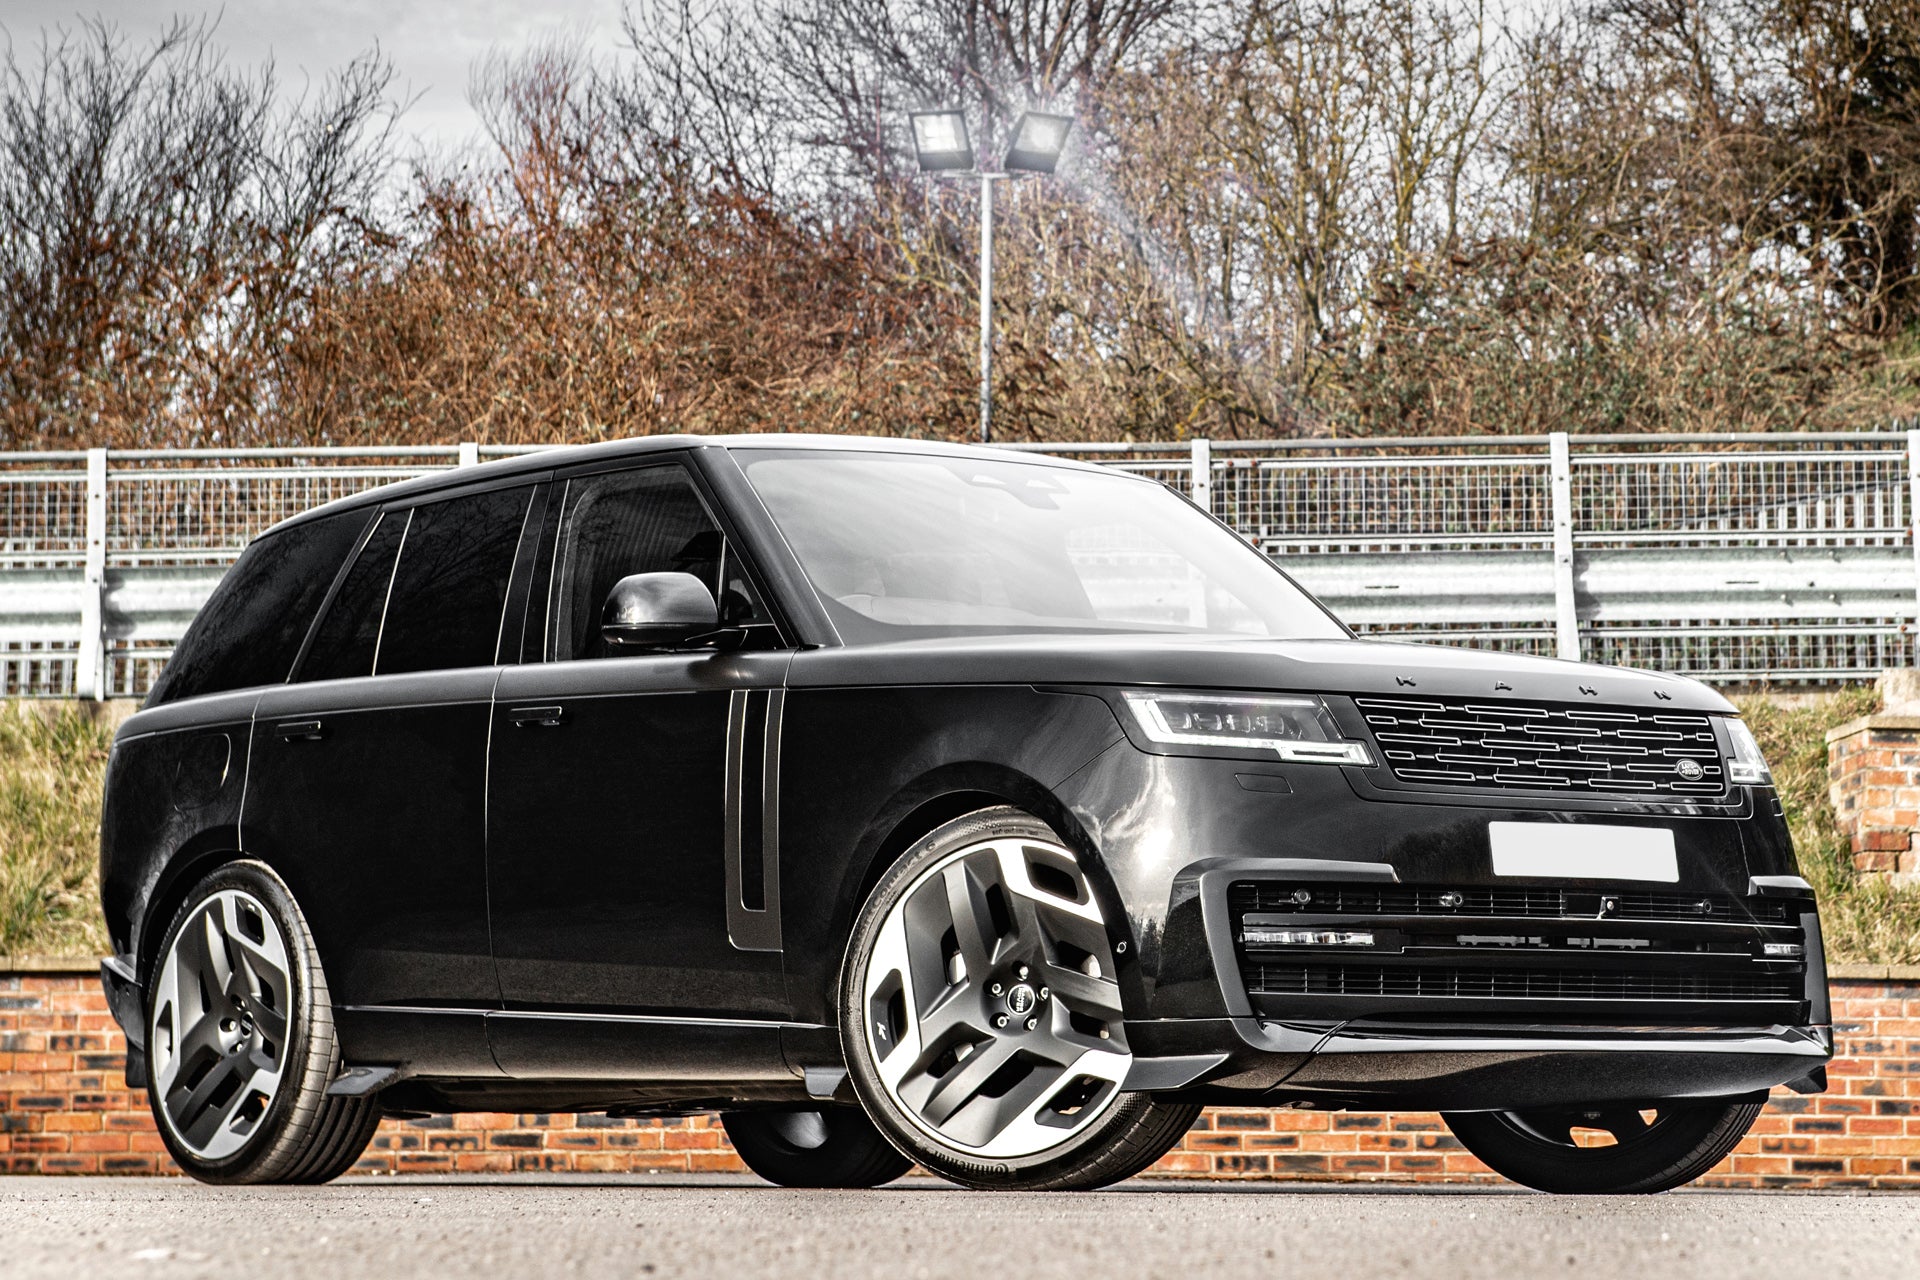 Tailor-made: Range Rover // RG - 02